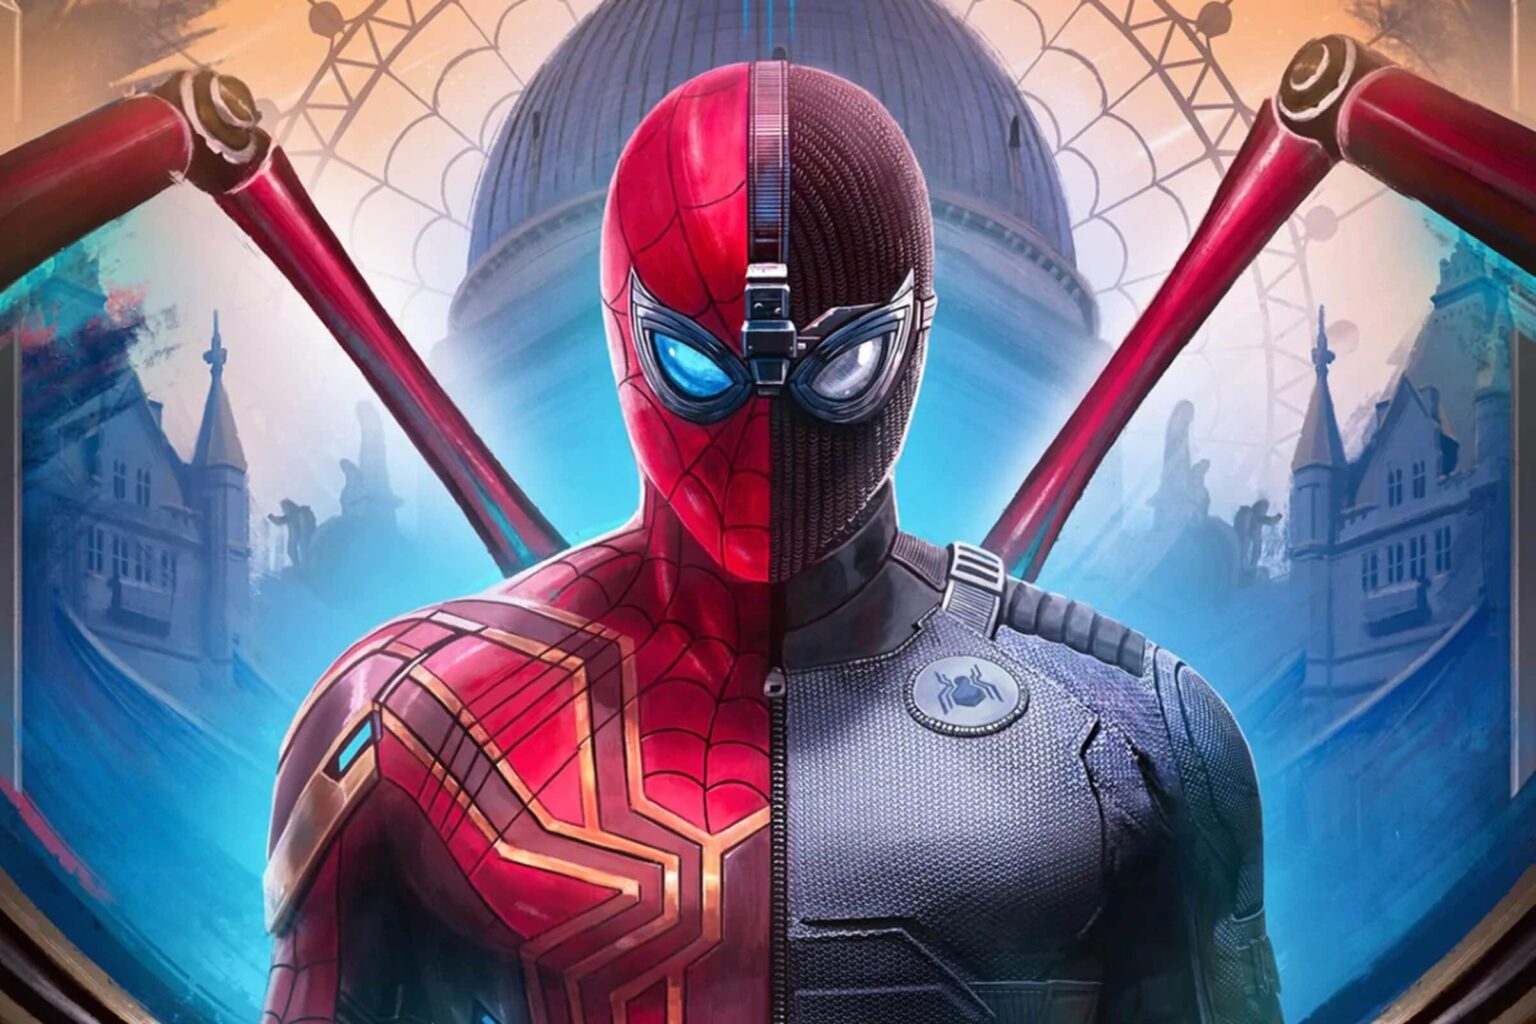 A recent deal between Disney & Sony could bring the 'Spider-Man' films to Disney+ later this year. Learn how to watch 'Spider-Man: Far From Home' online!